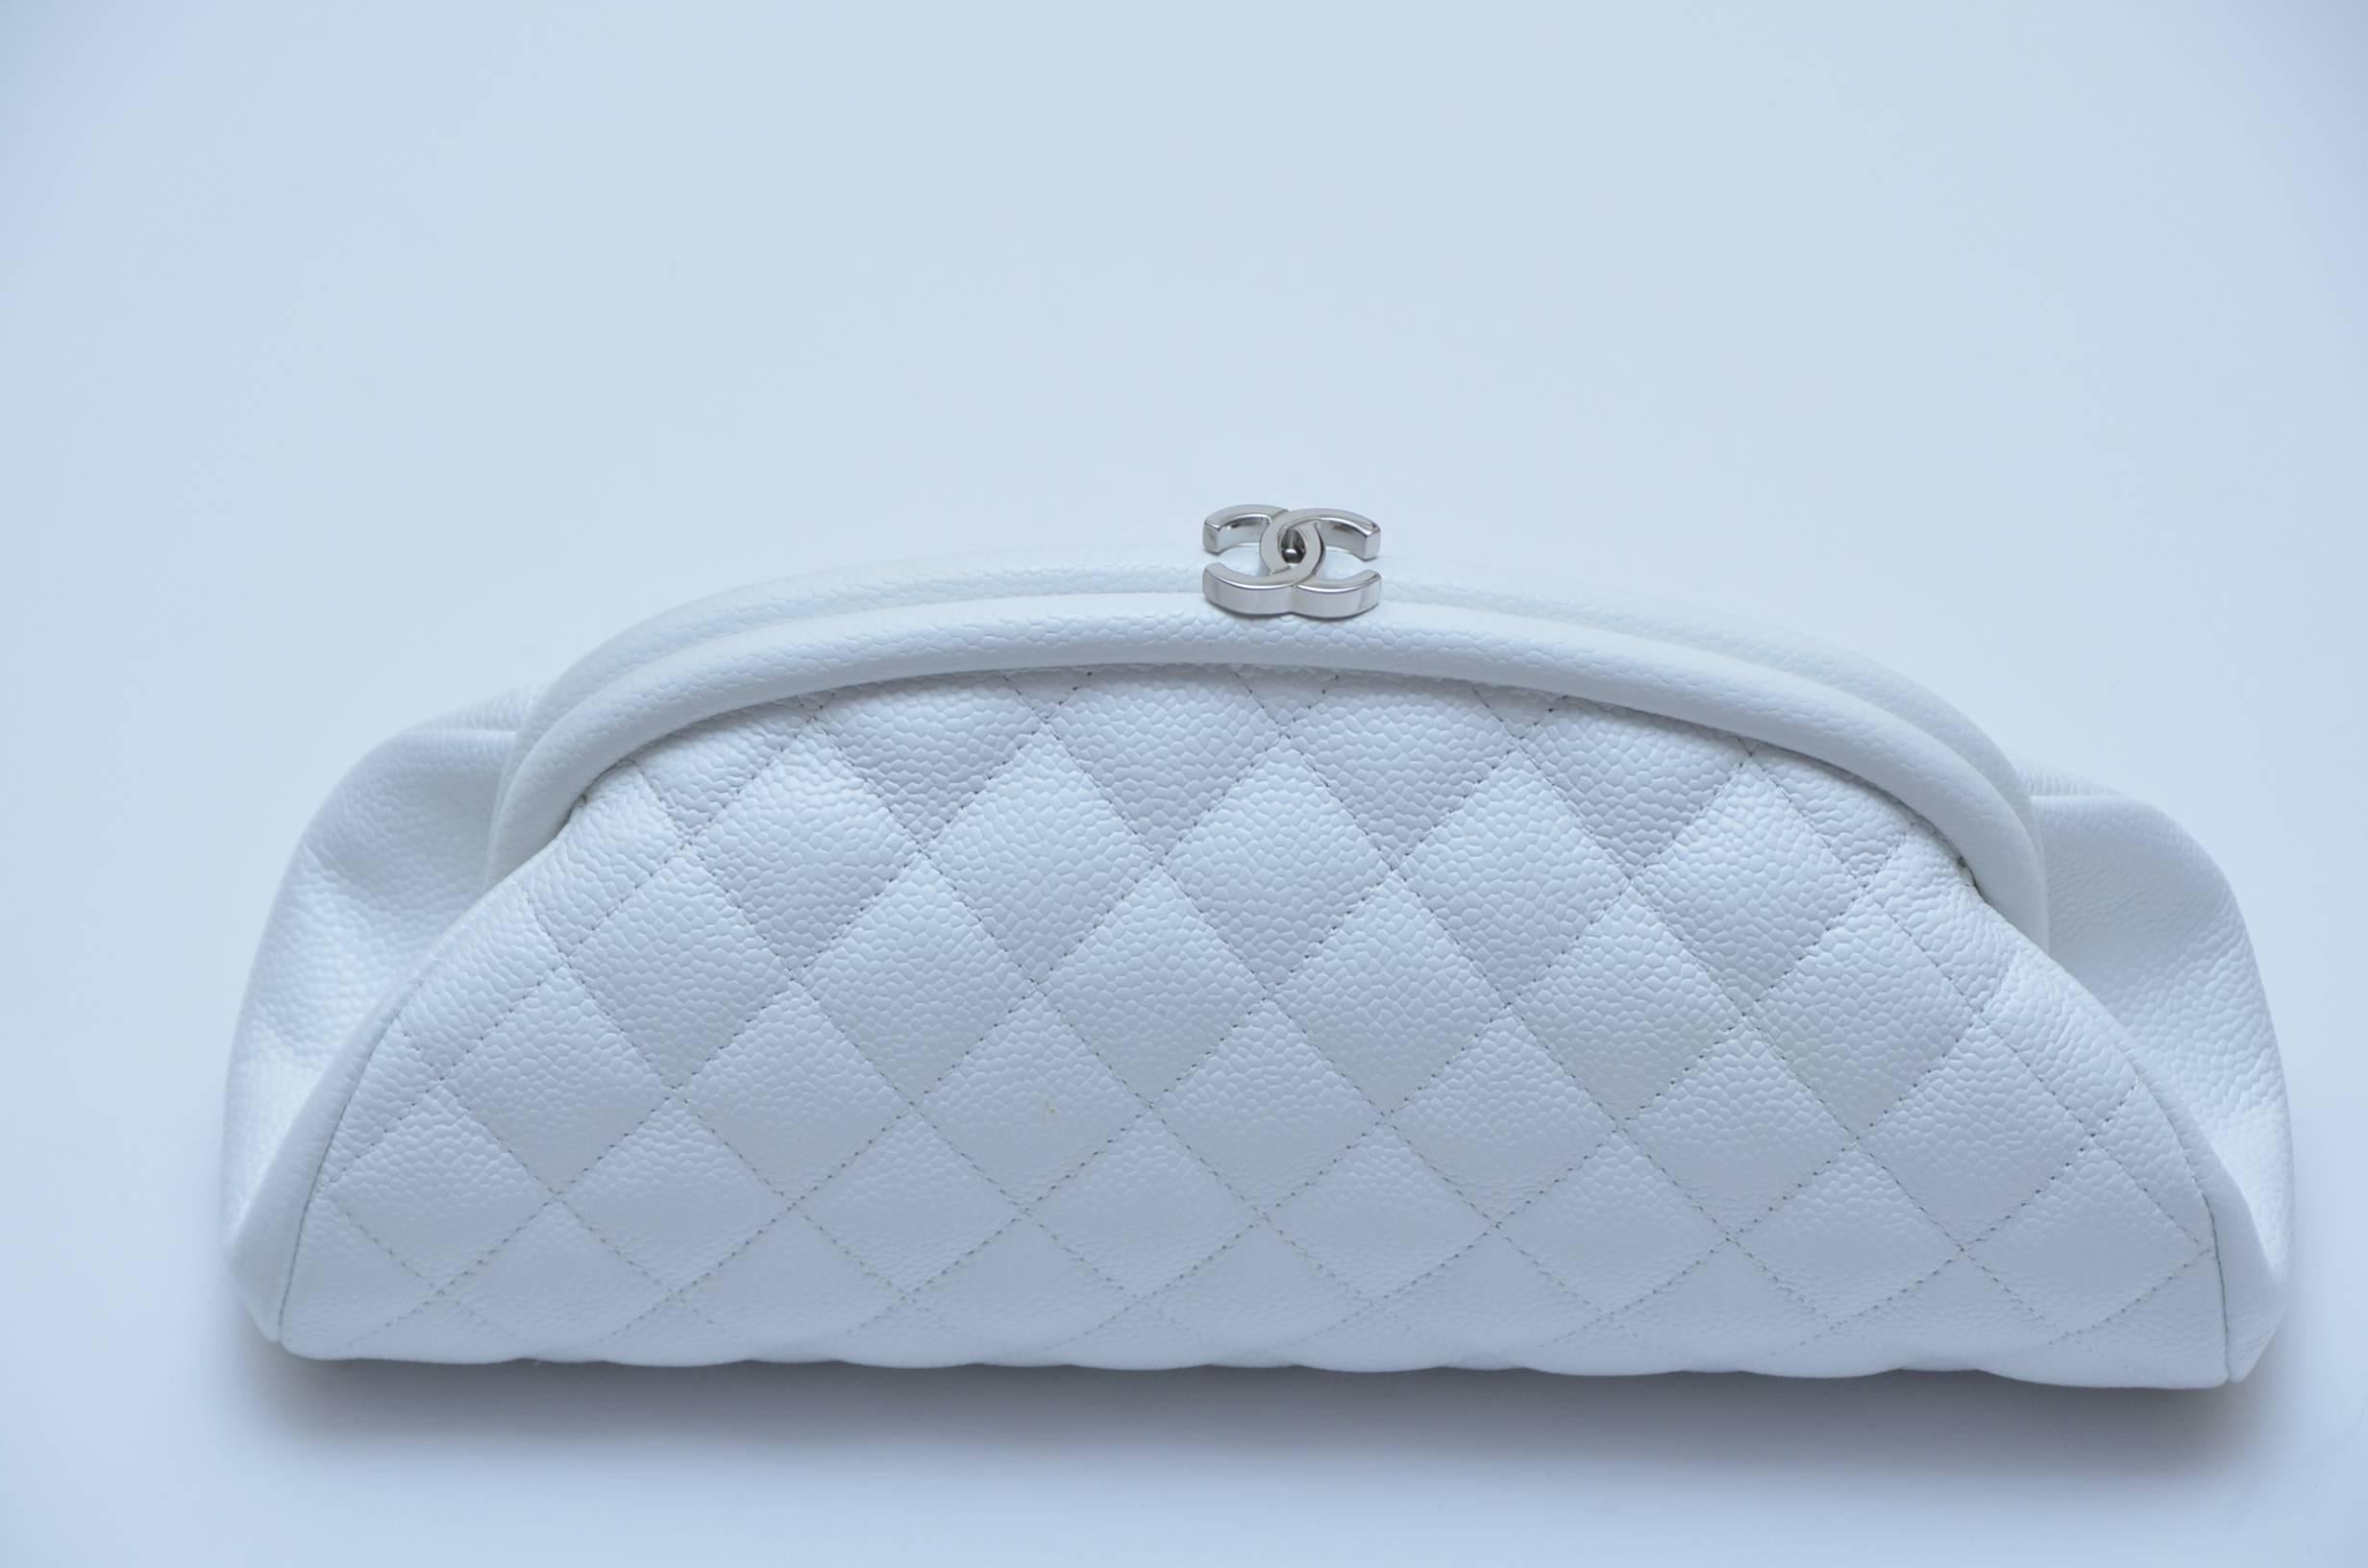 Chanel white caviar leather clutch.
Mint like new condition.
Lined in white fine  leather inside.Clean inside /out .
Comes with hologram inside,matching authenticity card, chanel little booklet  and dust bag.

This particular model called